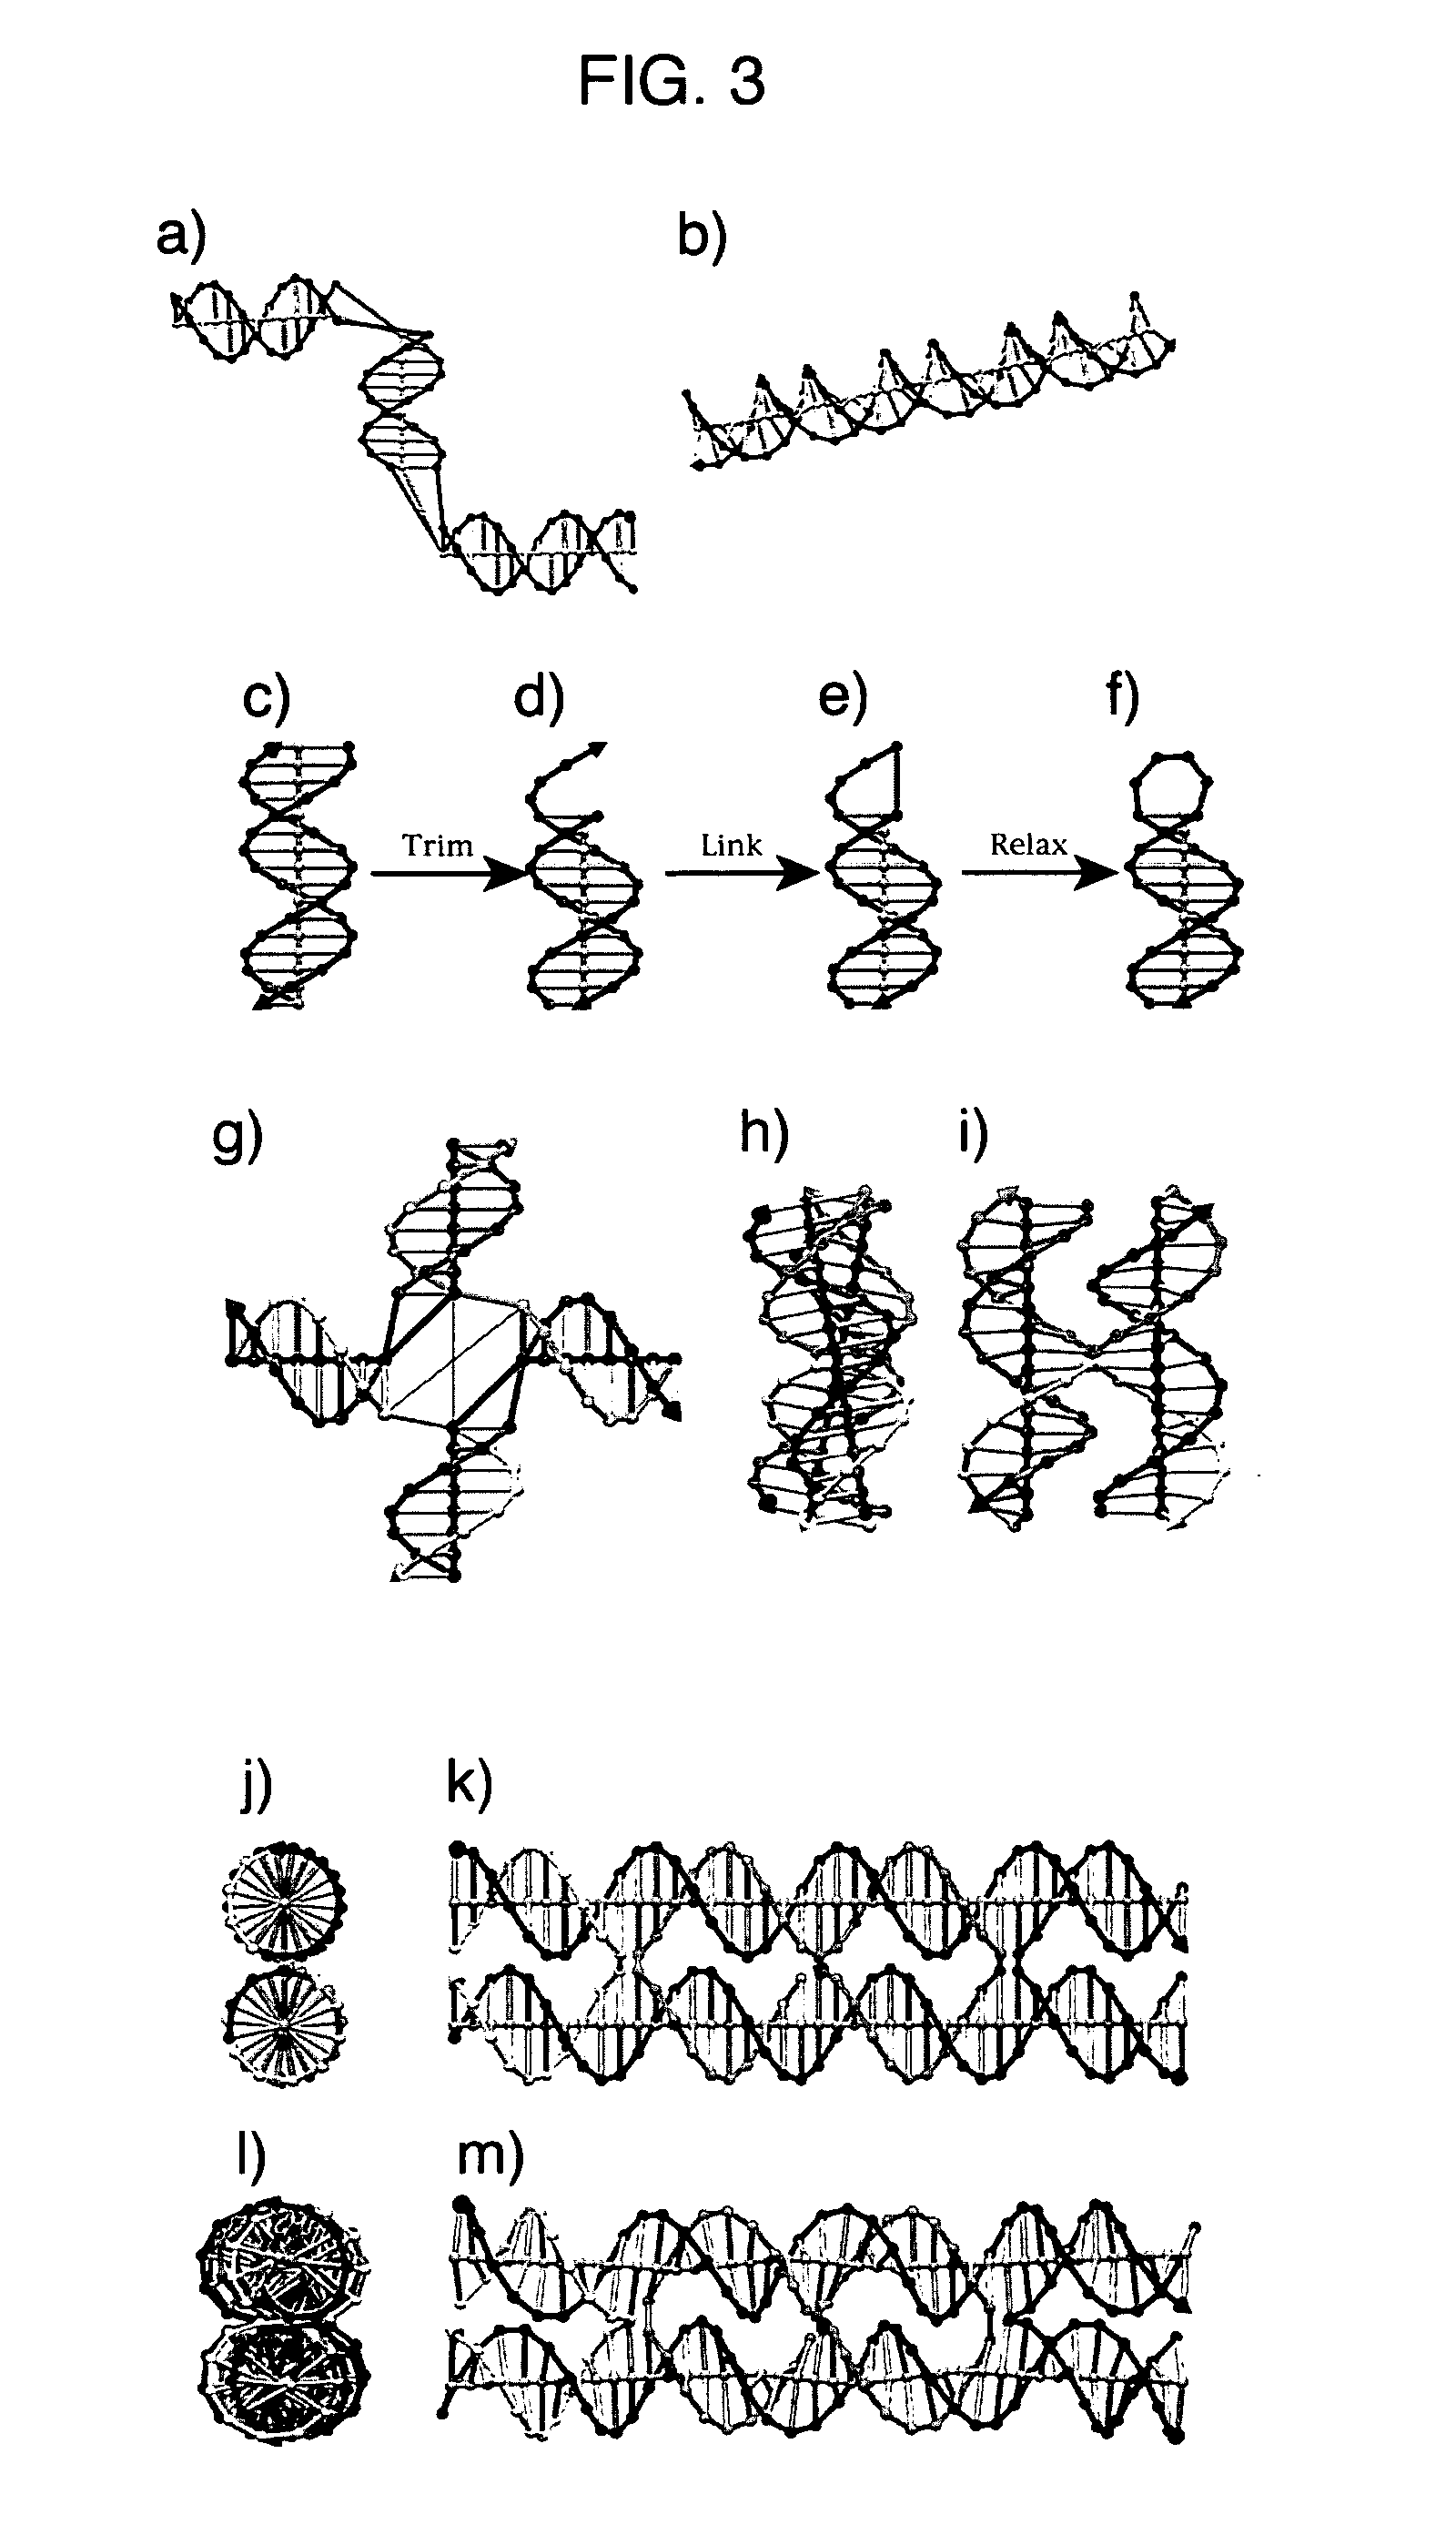 Methods of computer modeling a nucleic acid structure